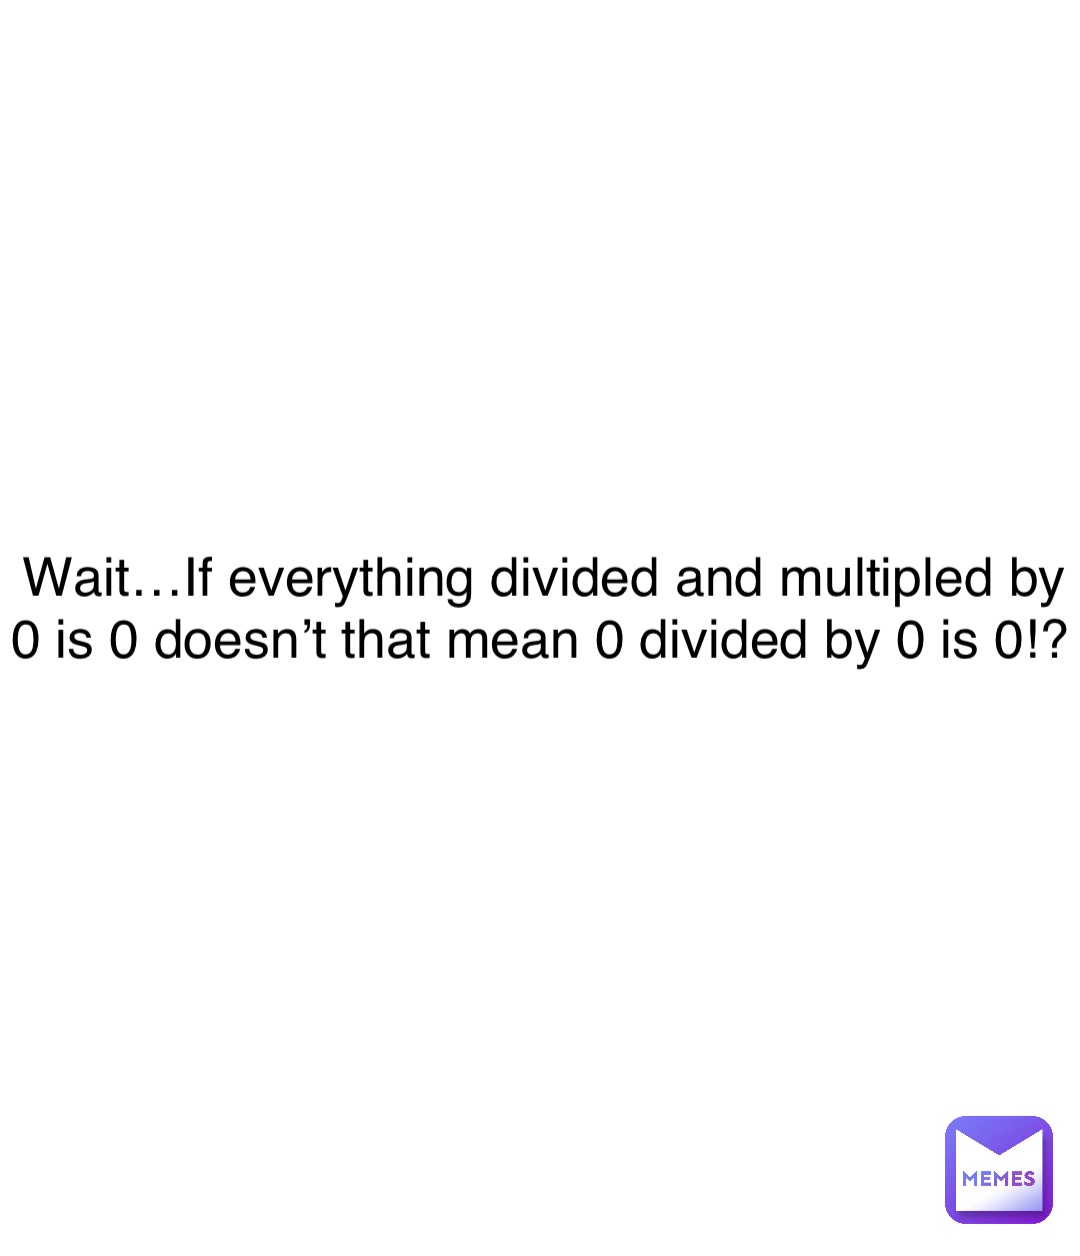 Double tap to edit Wait…If everything divided and multipled by 0 is 0 doesn’t that mean 0 divided by 0 is 0!?